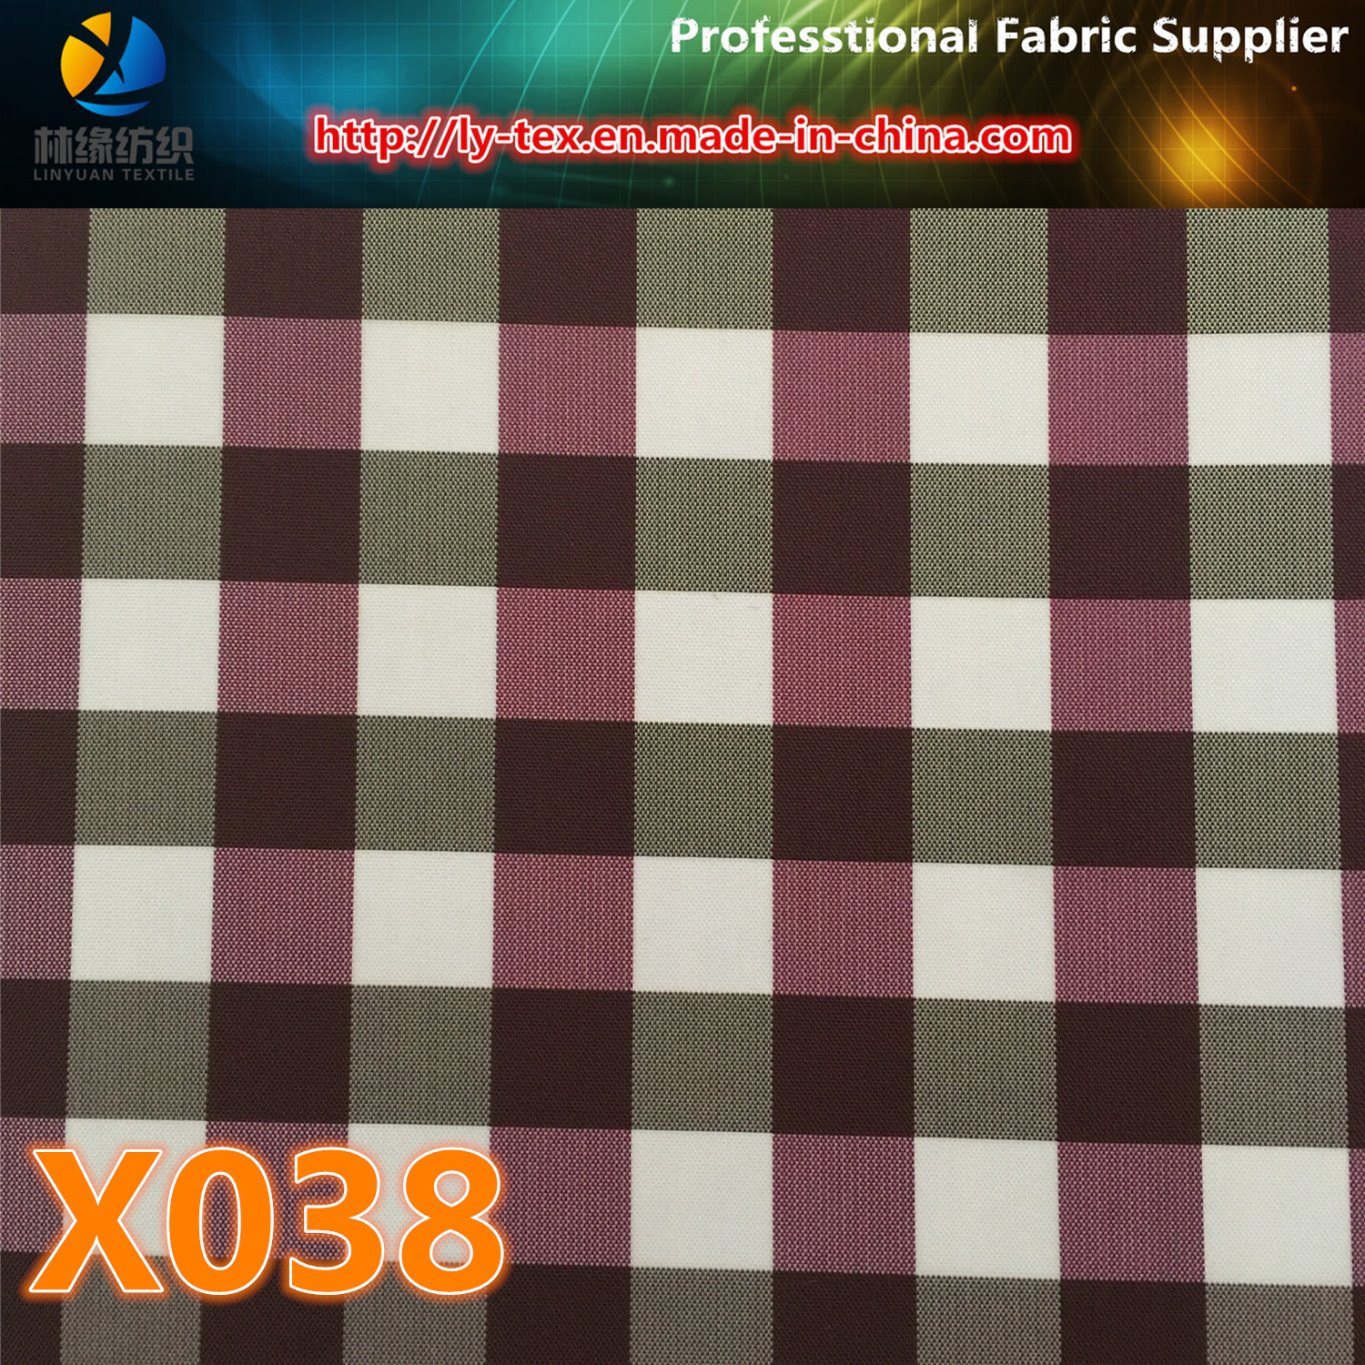 Yarn Dyed Fabric in Promt Goods, Polyester Check Fabric (X038-40)